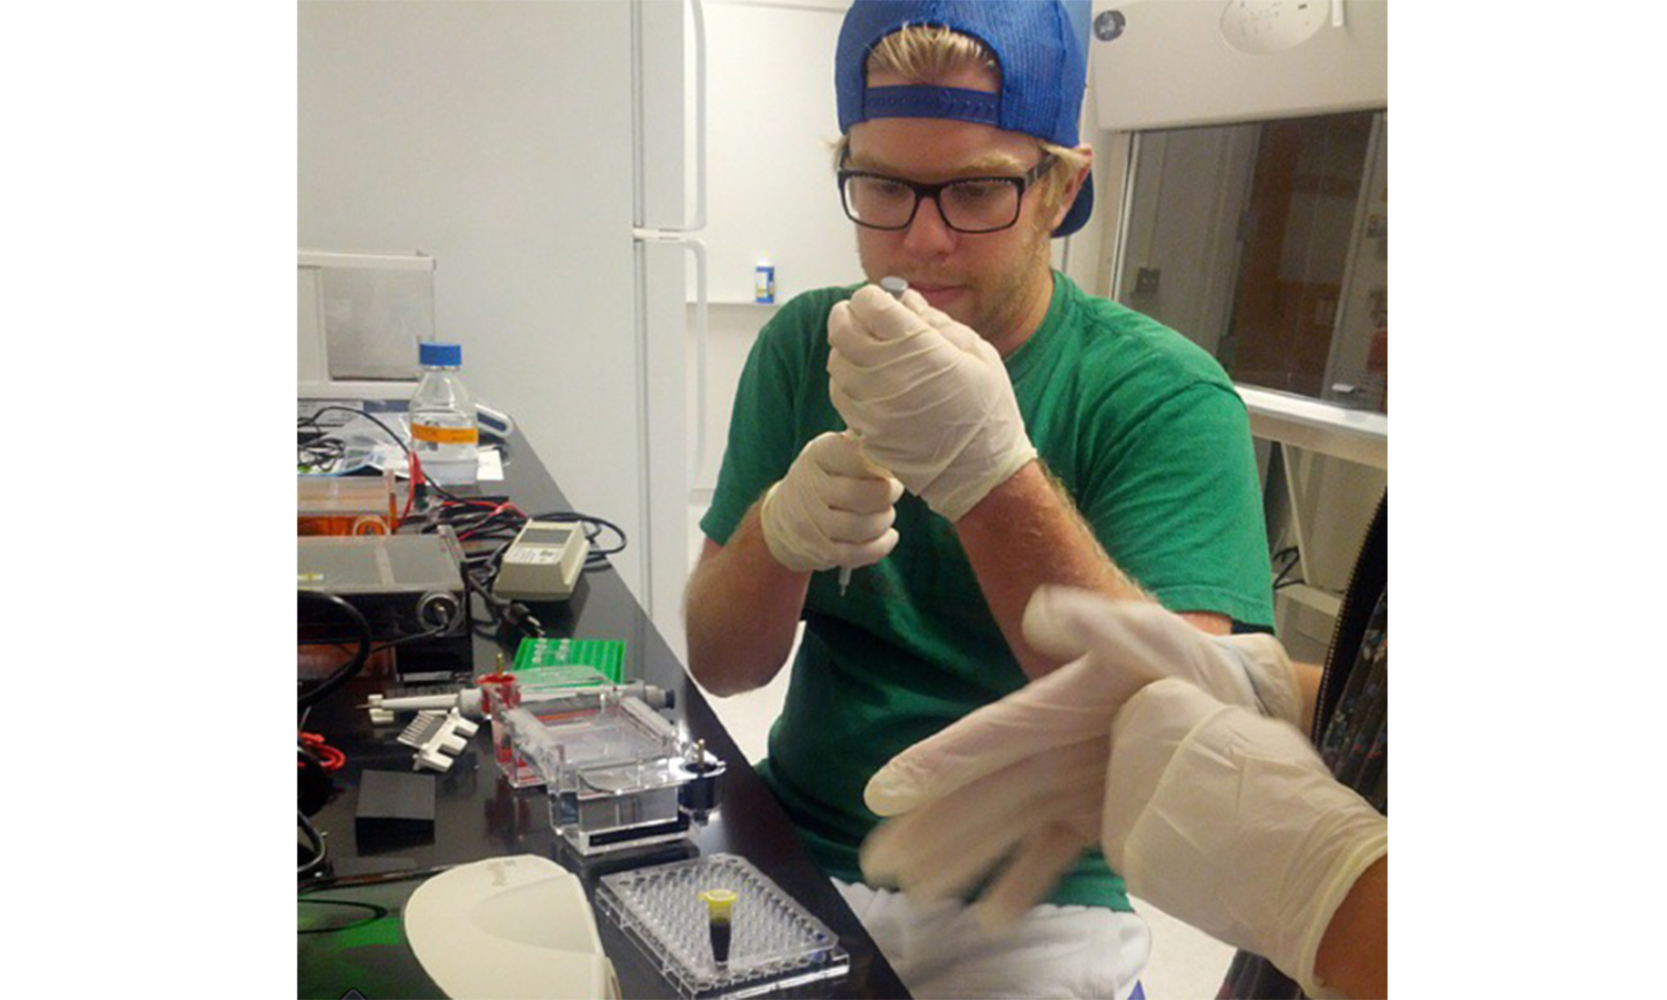 Biology faculty Matt Heinicke was awarded a grant to have UG students assist him with research.